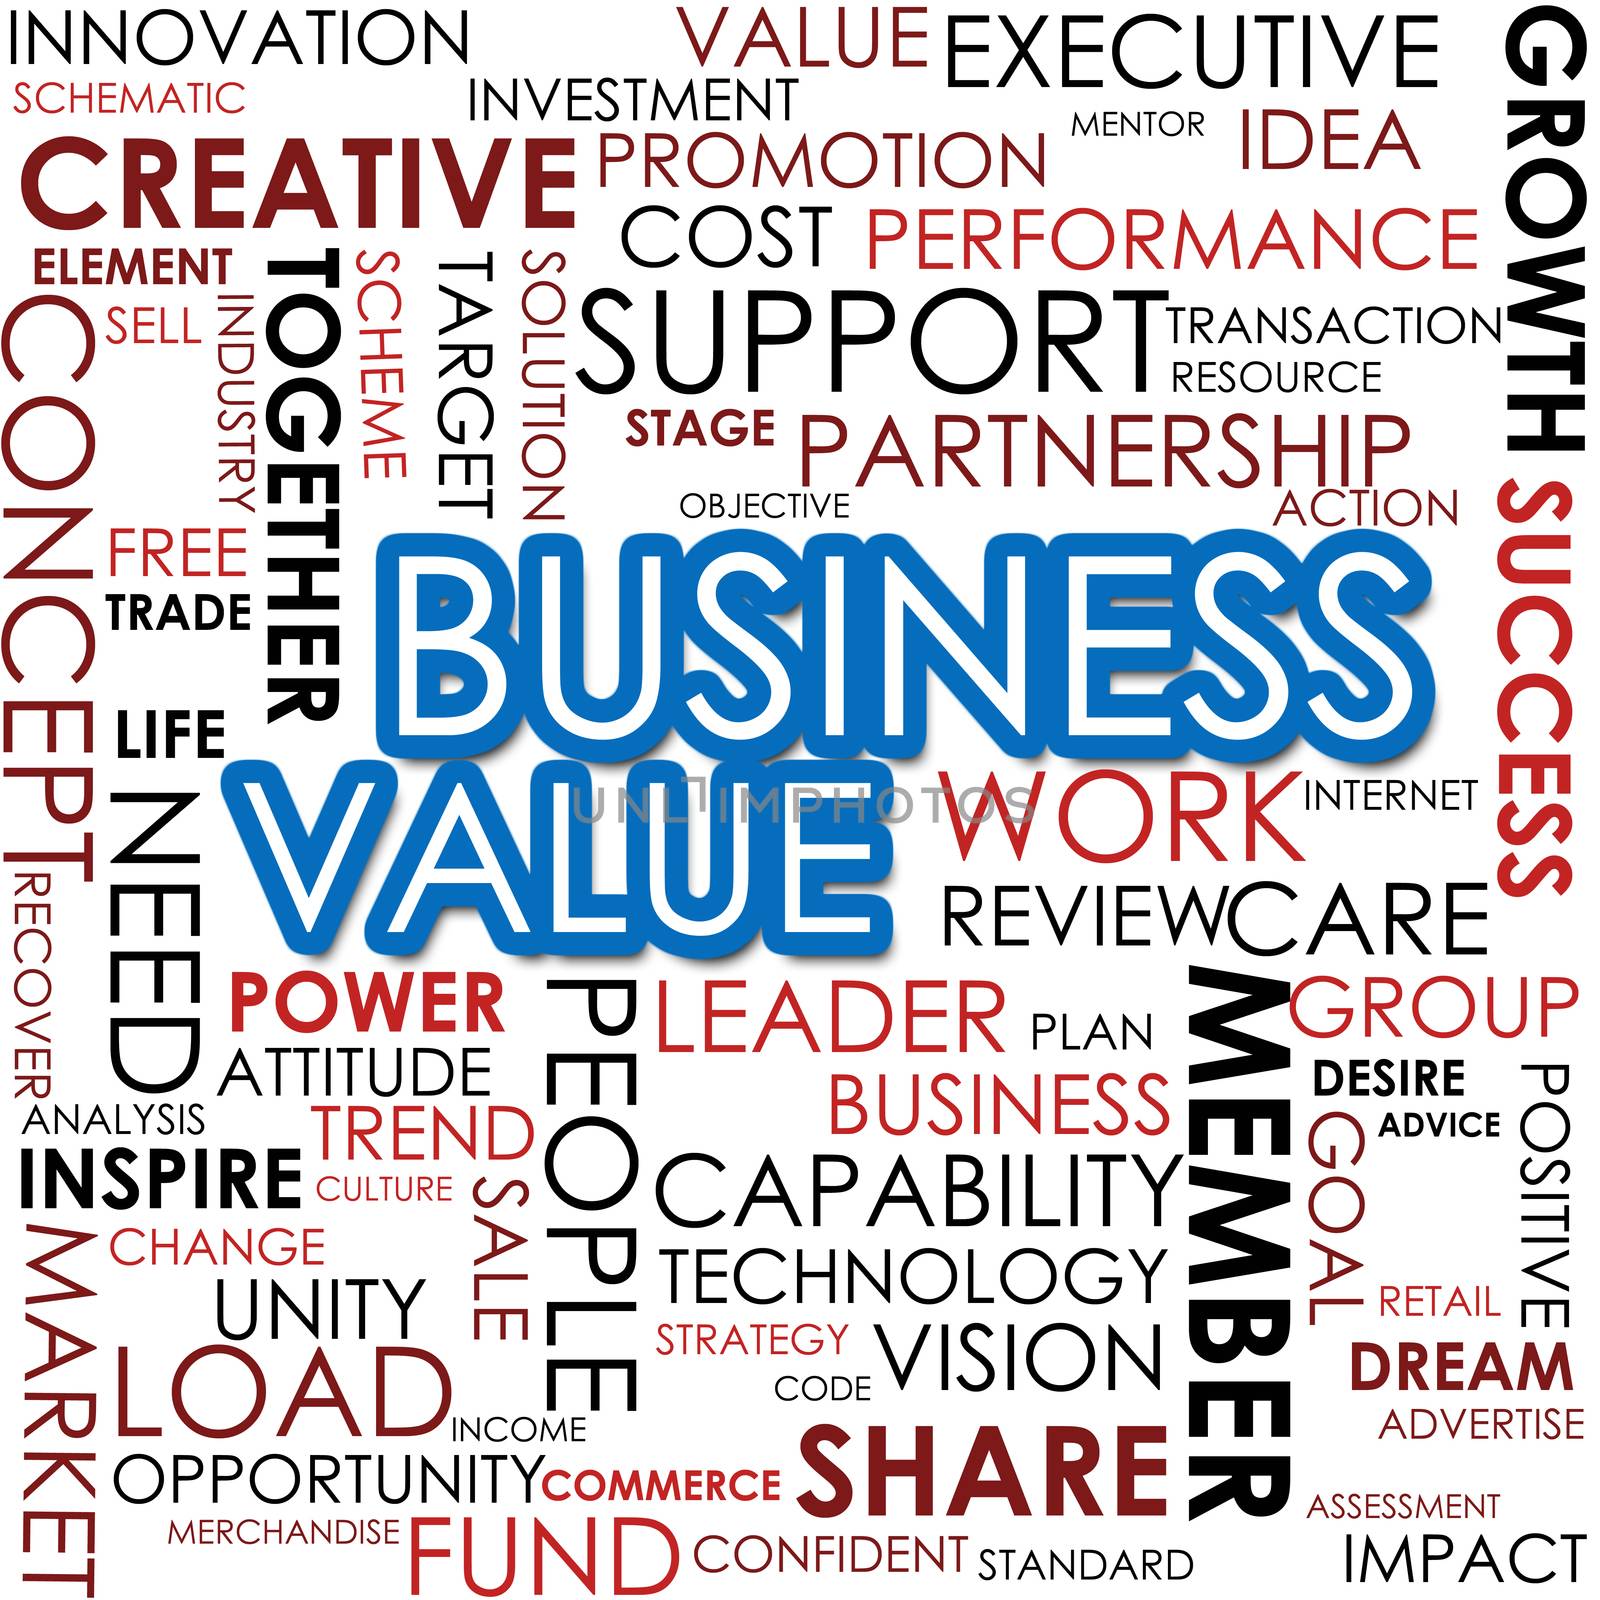 Business value word cloud image with hi-res rendered artwork that could be used for any graphic design.